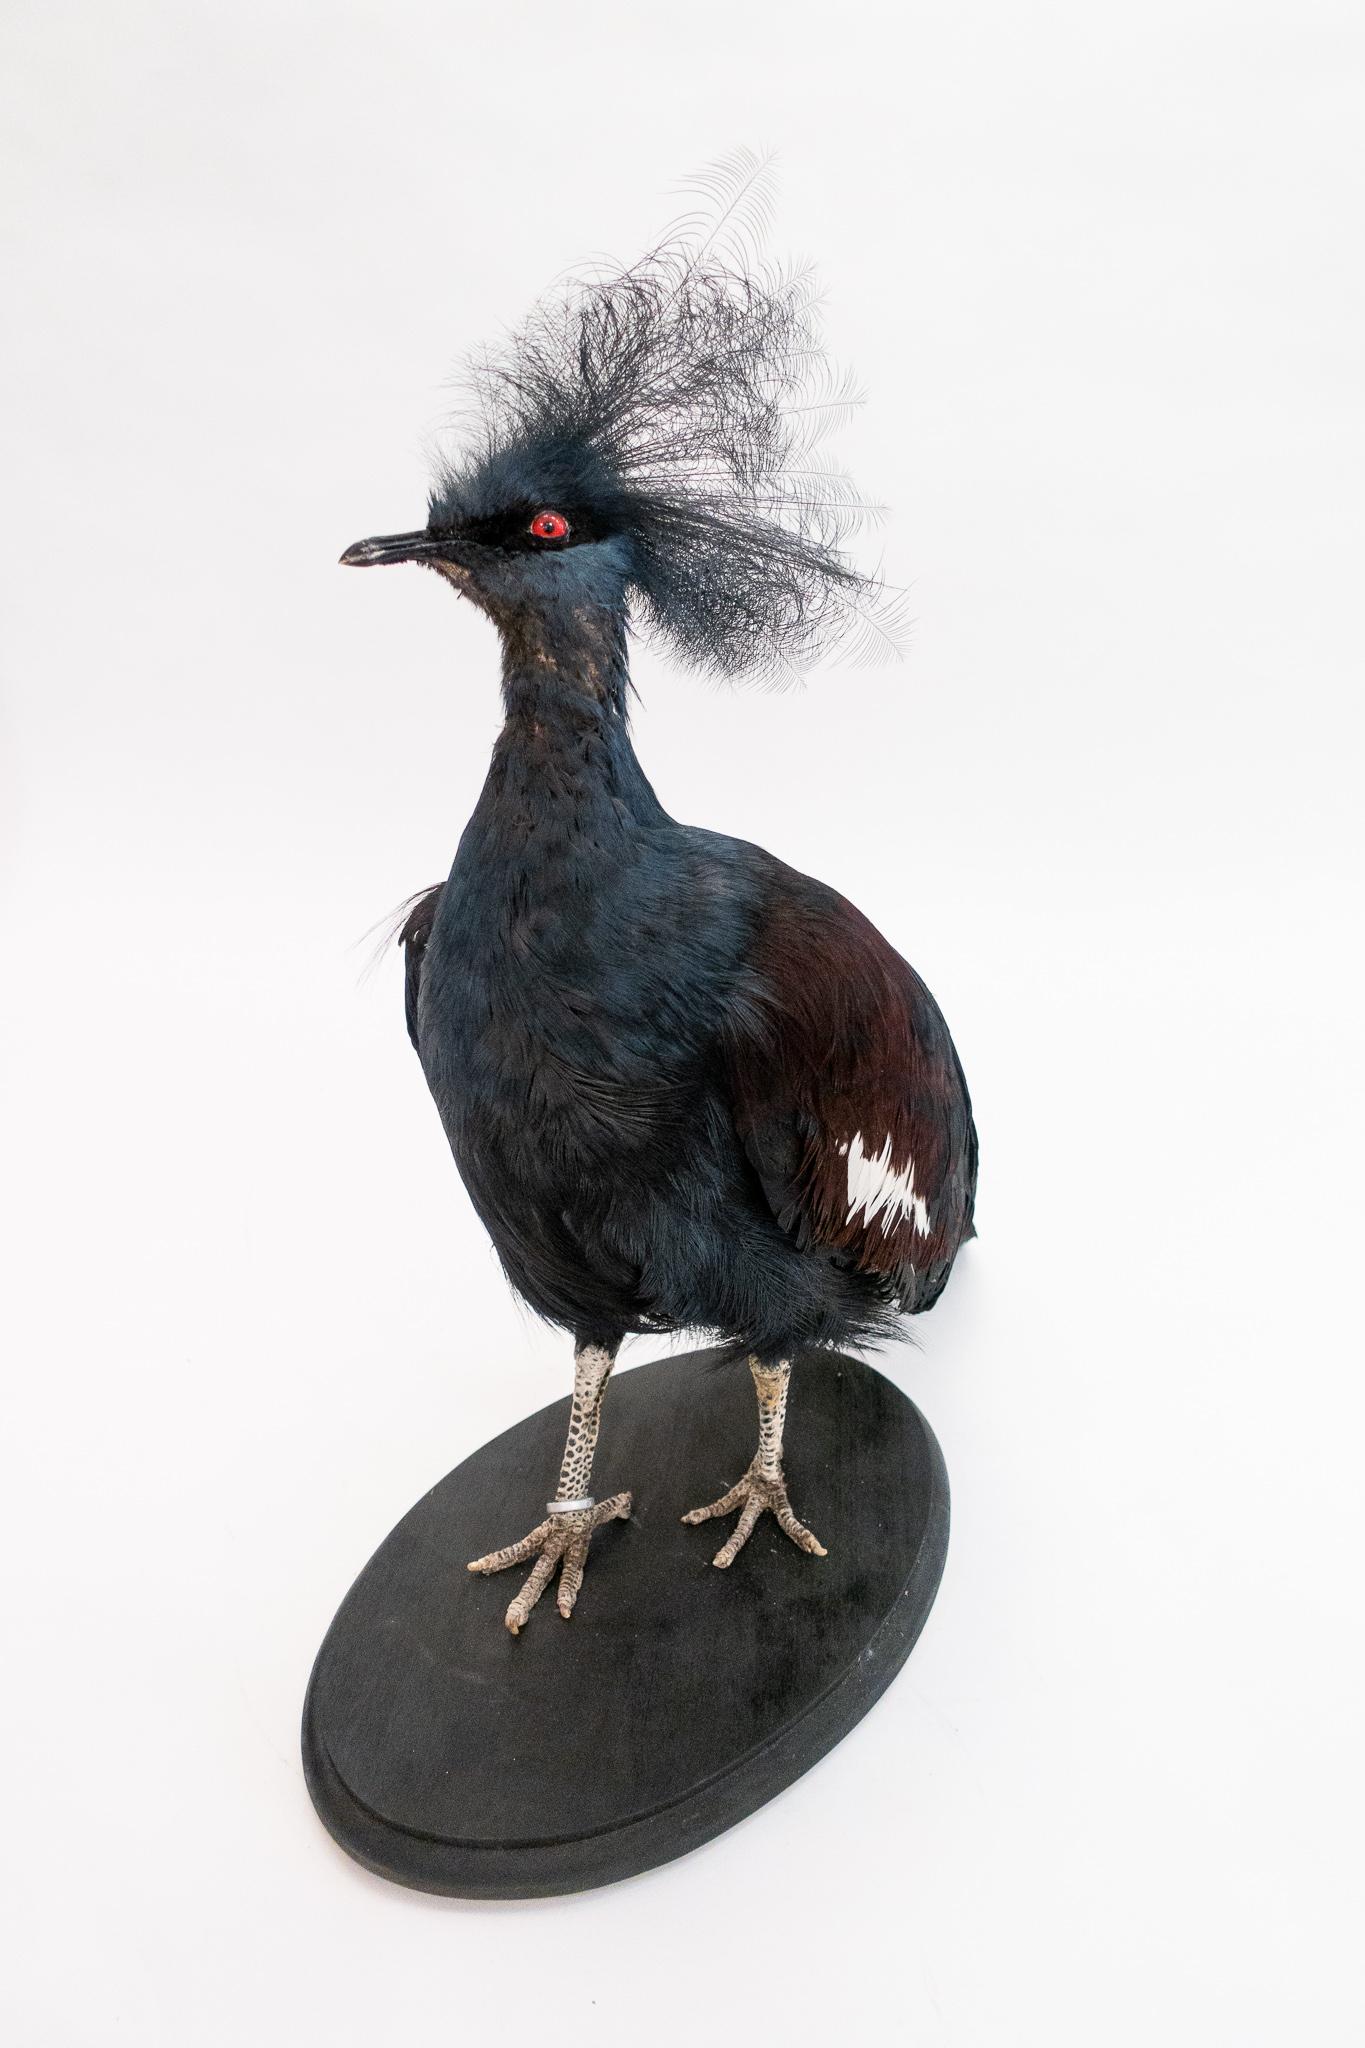 Beautifully mounted Victoria crowned pigeon (Goura Victoria) specimen. This bird is a large, bluish-grey pigeon with elegant blue lace-like crests, maroon breast, and red irises. Its name commemorates the British monarch Queen Victoria. Their